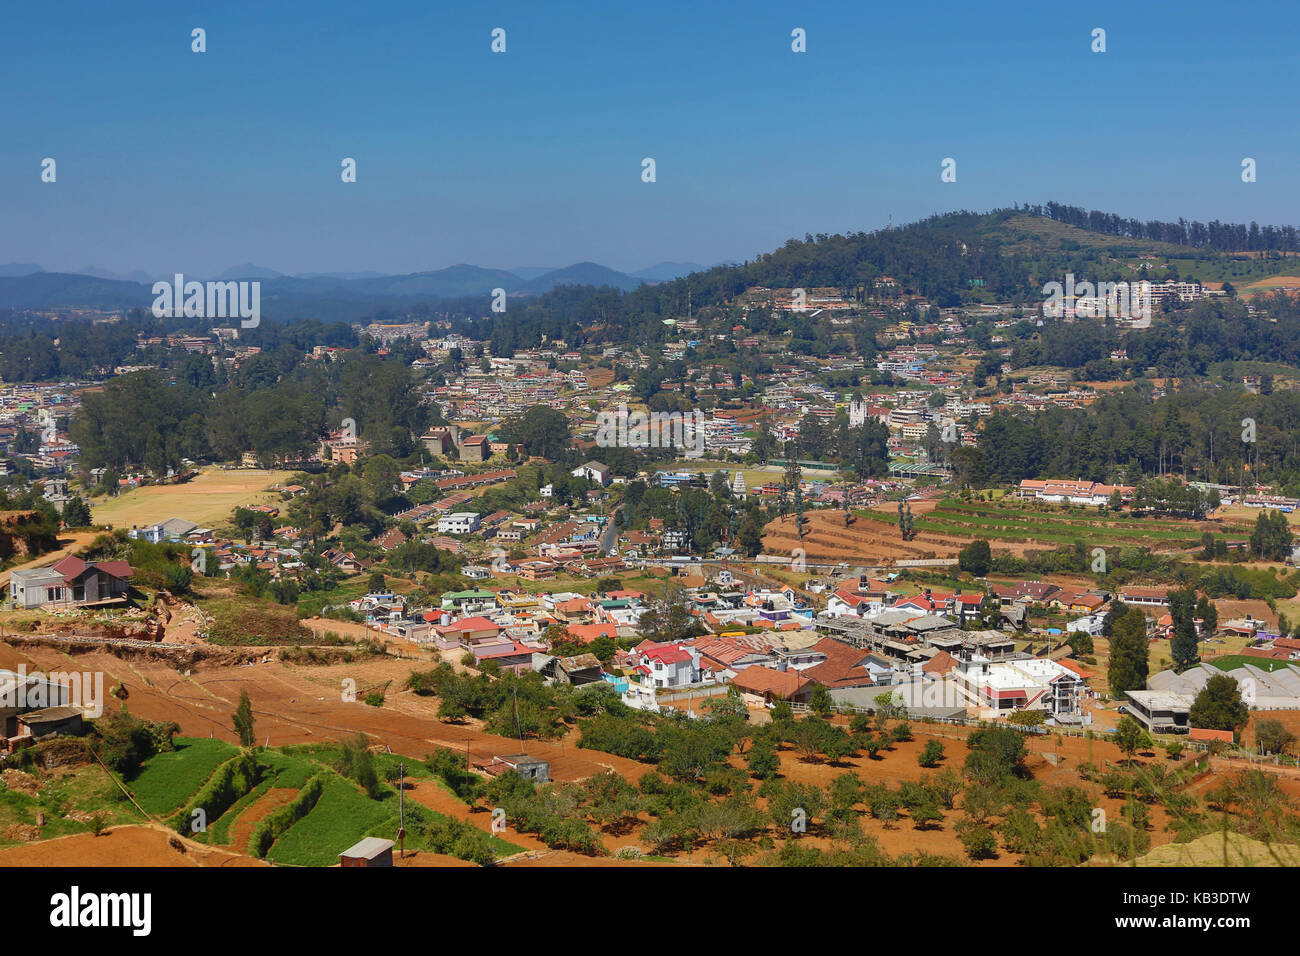 India, Tamil Nadu, Ooty, townscape, overview Stock Photo